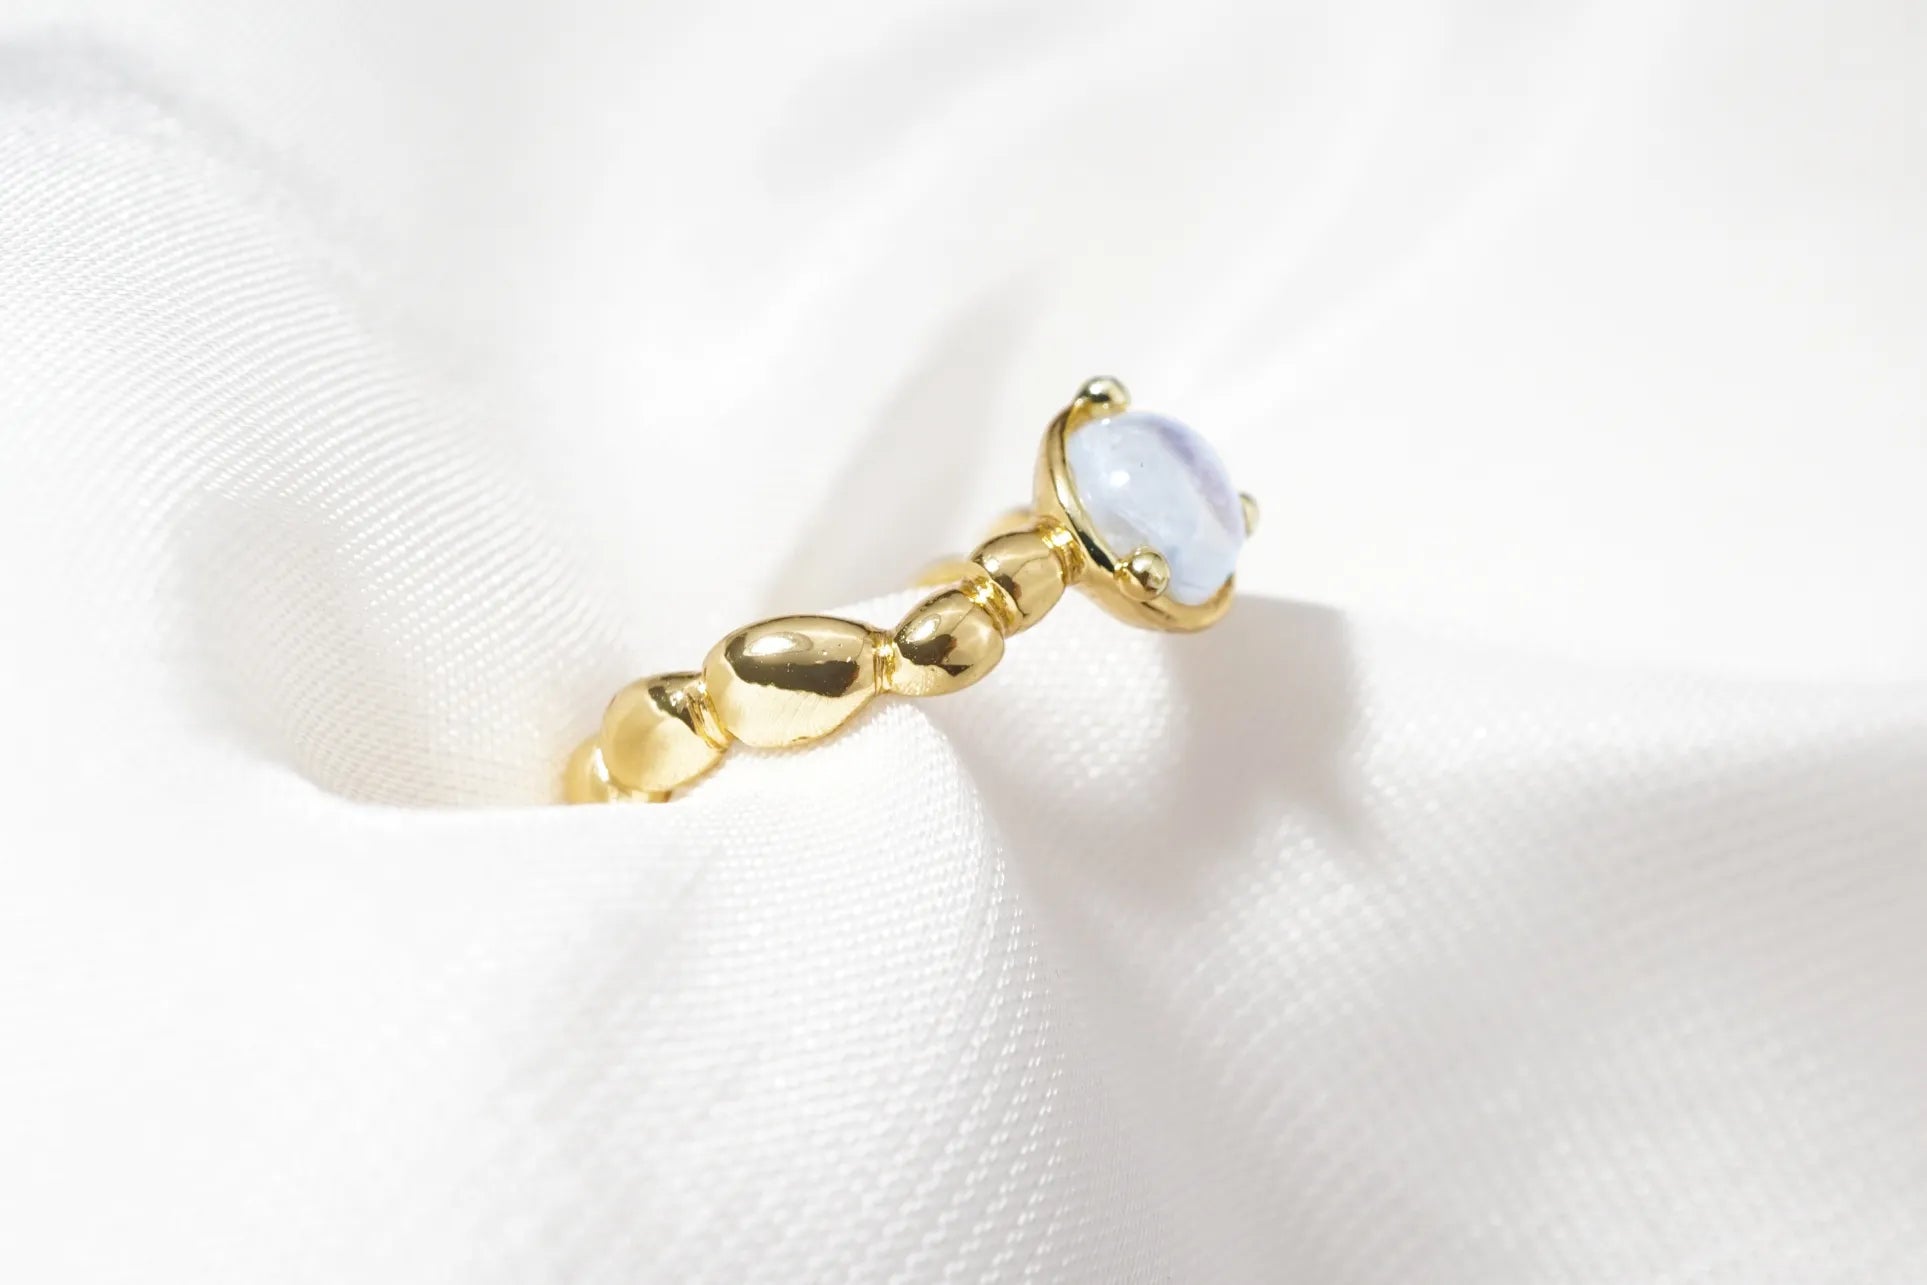 Chia Jewelry gem stones rings design collection.One of a kind gold moonstone simple and artistic bean pebbles statement ring.